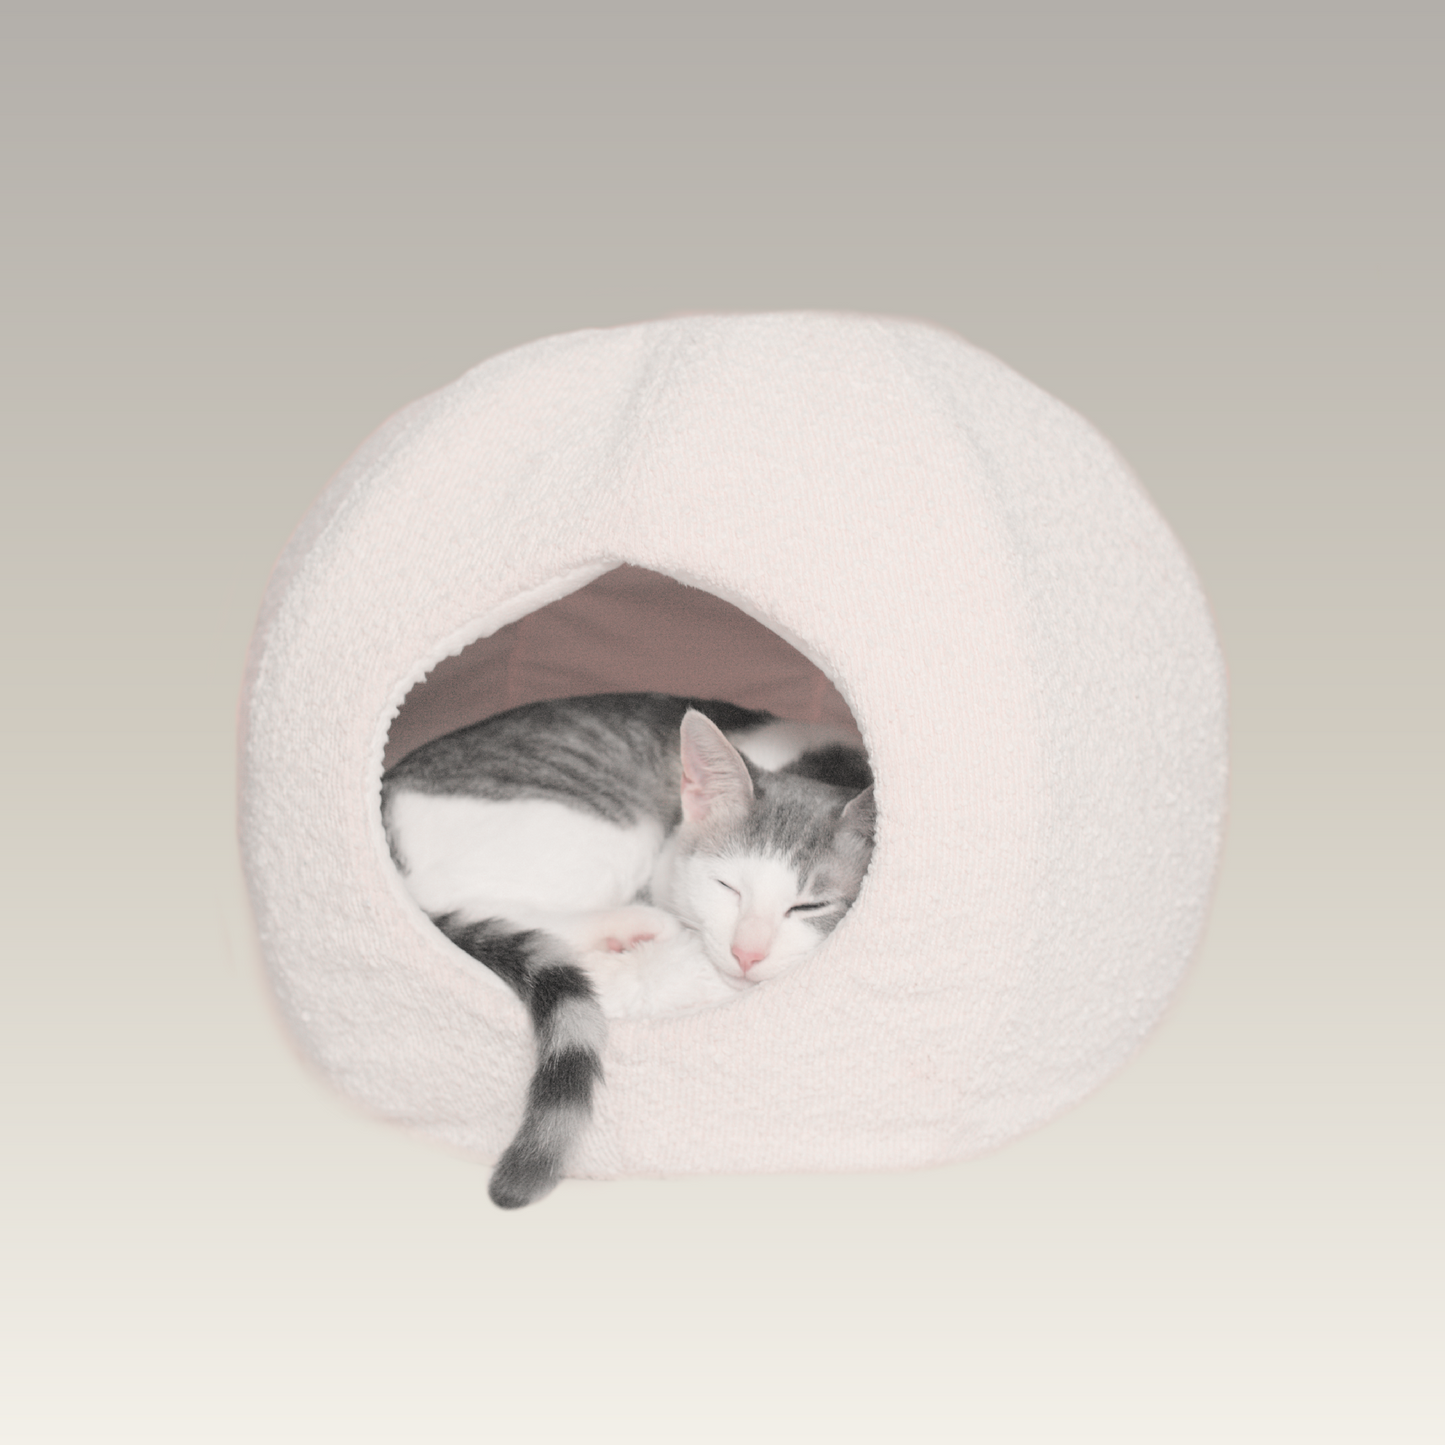 moon cat cave with grey and white cat sleeping inside by catenary home modern cat furniture on gradient product background is like a cat igloo, cat nest and cat hideaway all in one